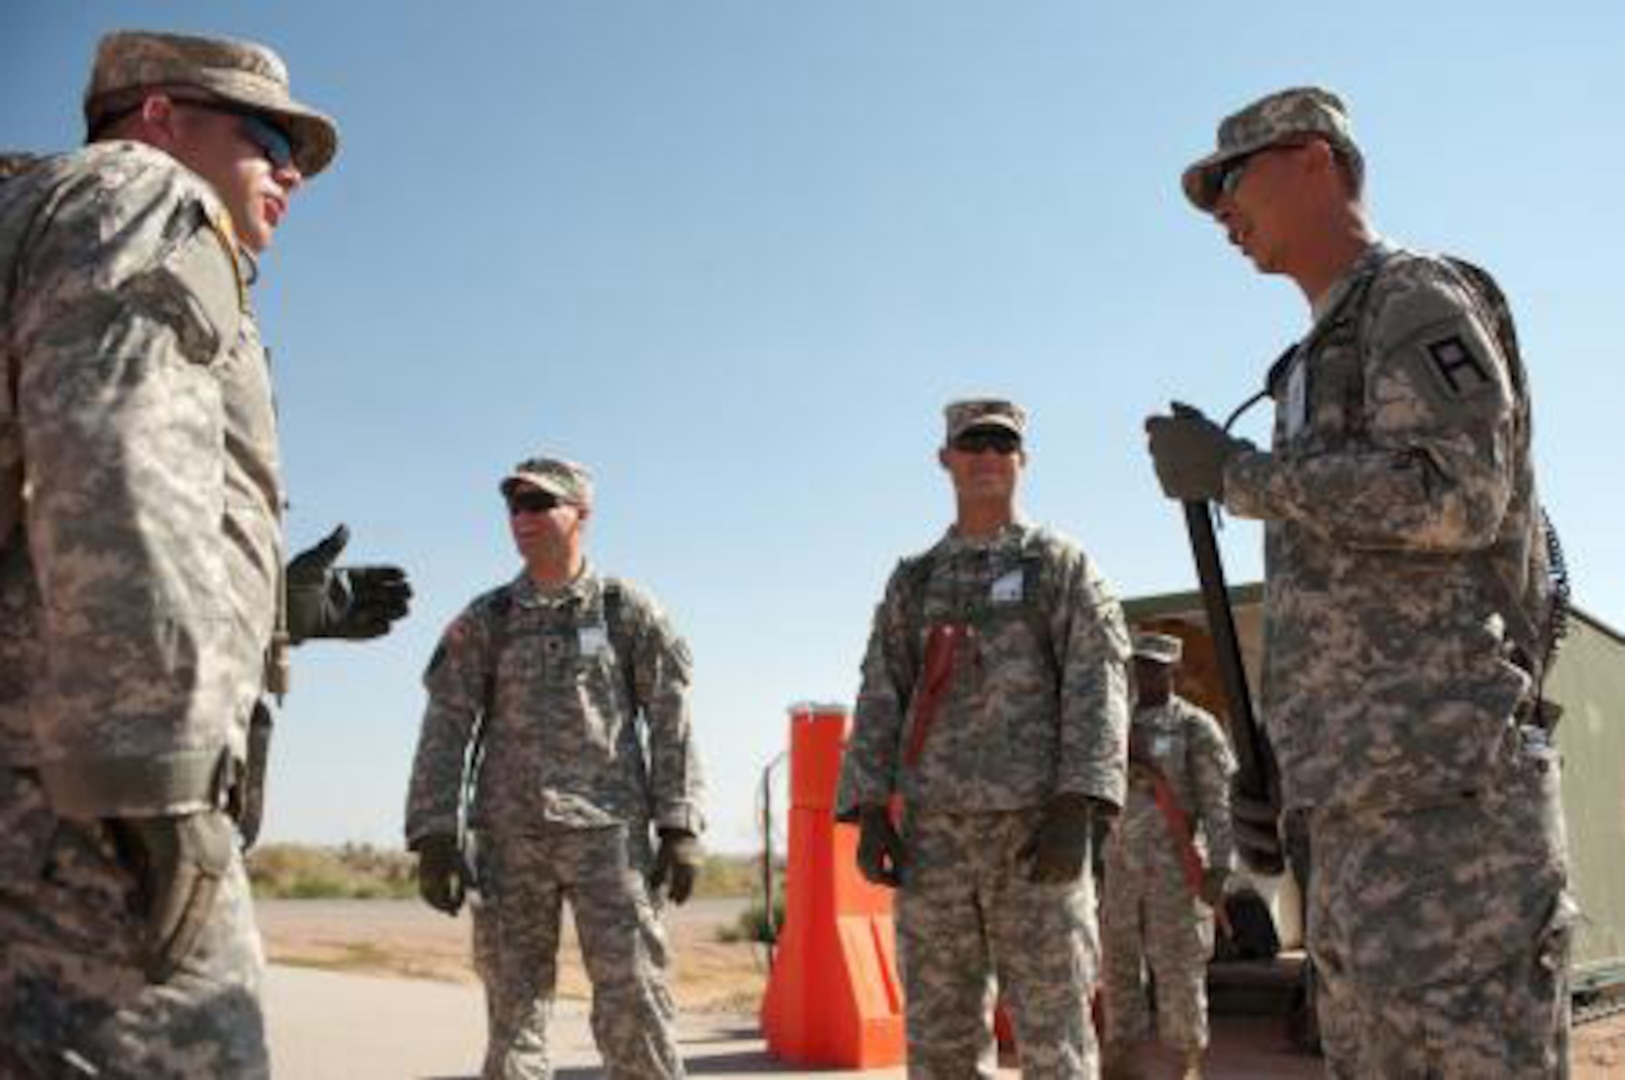 Staff Sgt. Johan Pae, right, an observer controller/trainer with Division West's 5th Armored Brigade, talks with soldiers of the Maine Army National Guard's 488th Military Police Company at the detainee operations training facility at Camp McGregor, N.M., last month.